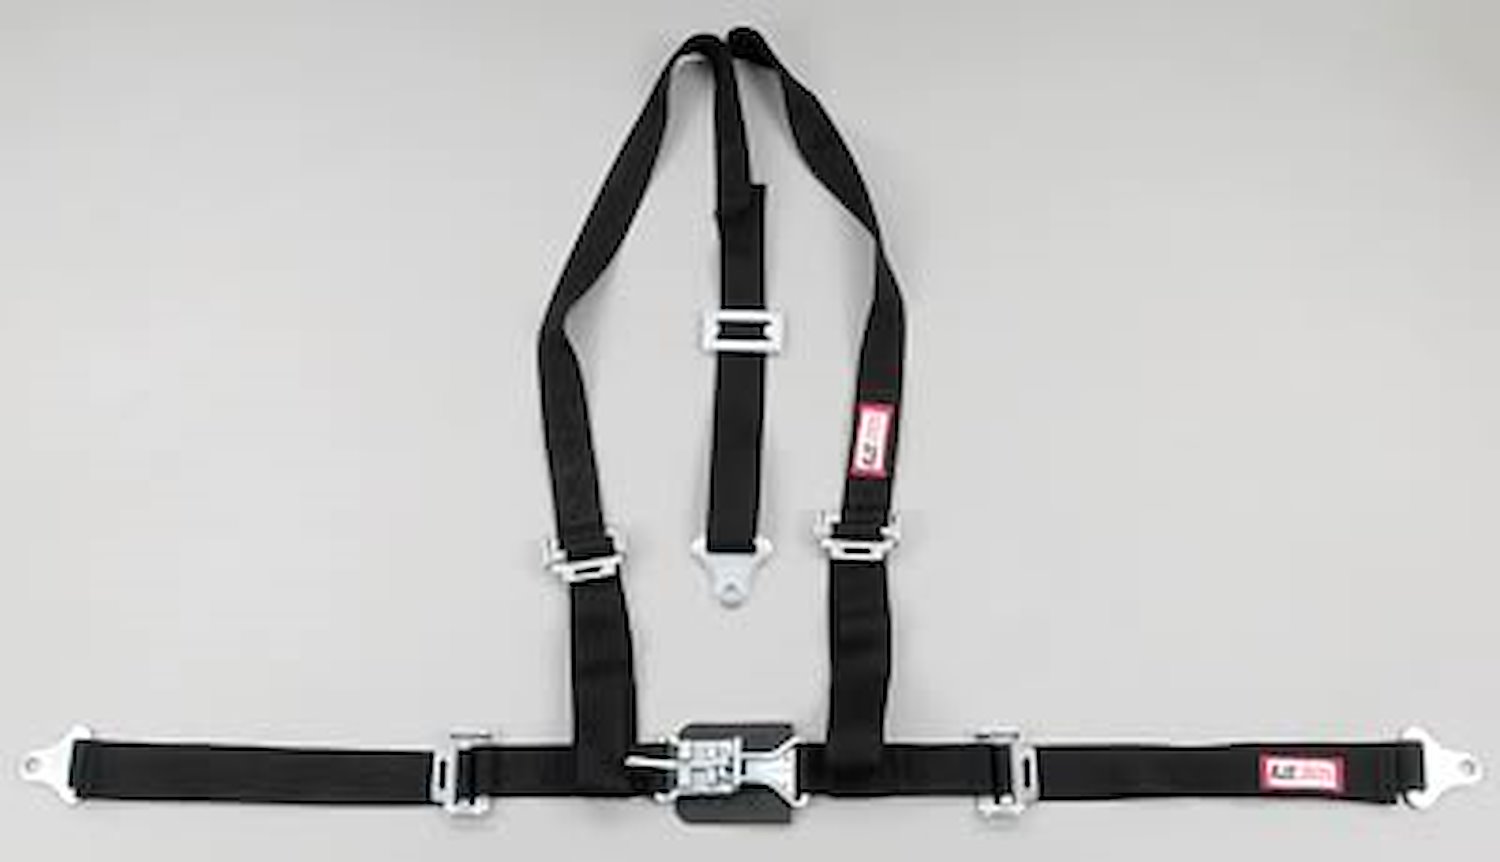 NON-SFI L&L HARNESS 2 PULL DOWN Lap Belt SNAP SEWN IN 2 S.H. INDIVIDUAL FLOOR Mount w/STERNUM STRAP WRAP/BOLT YELLOW